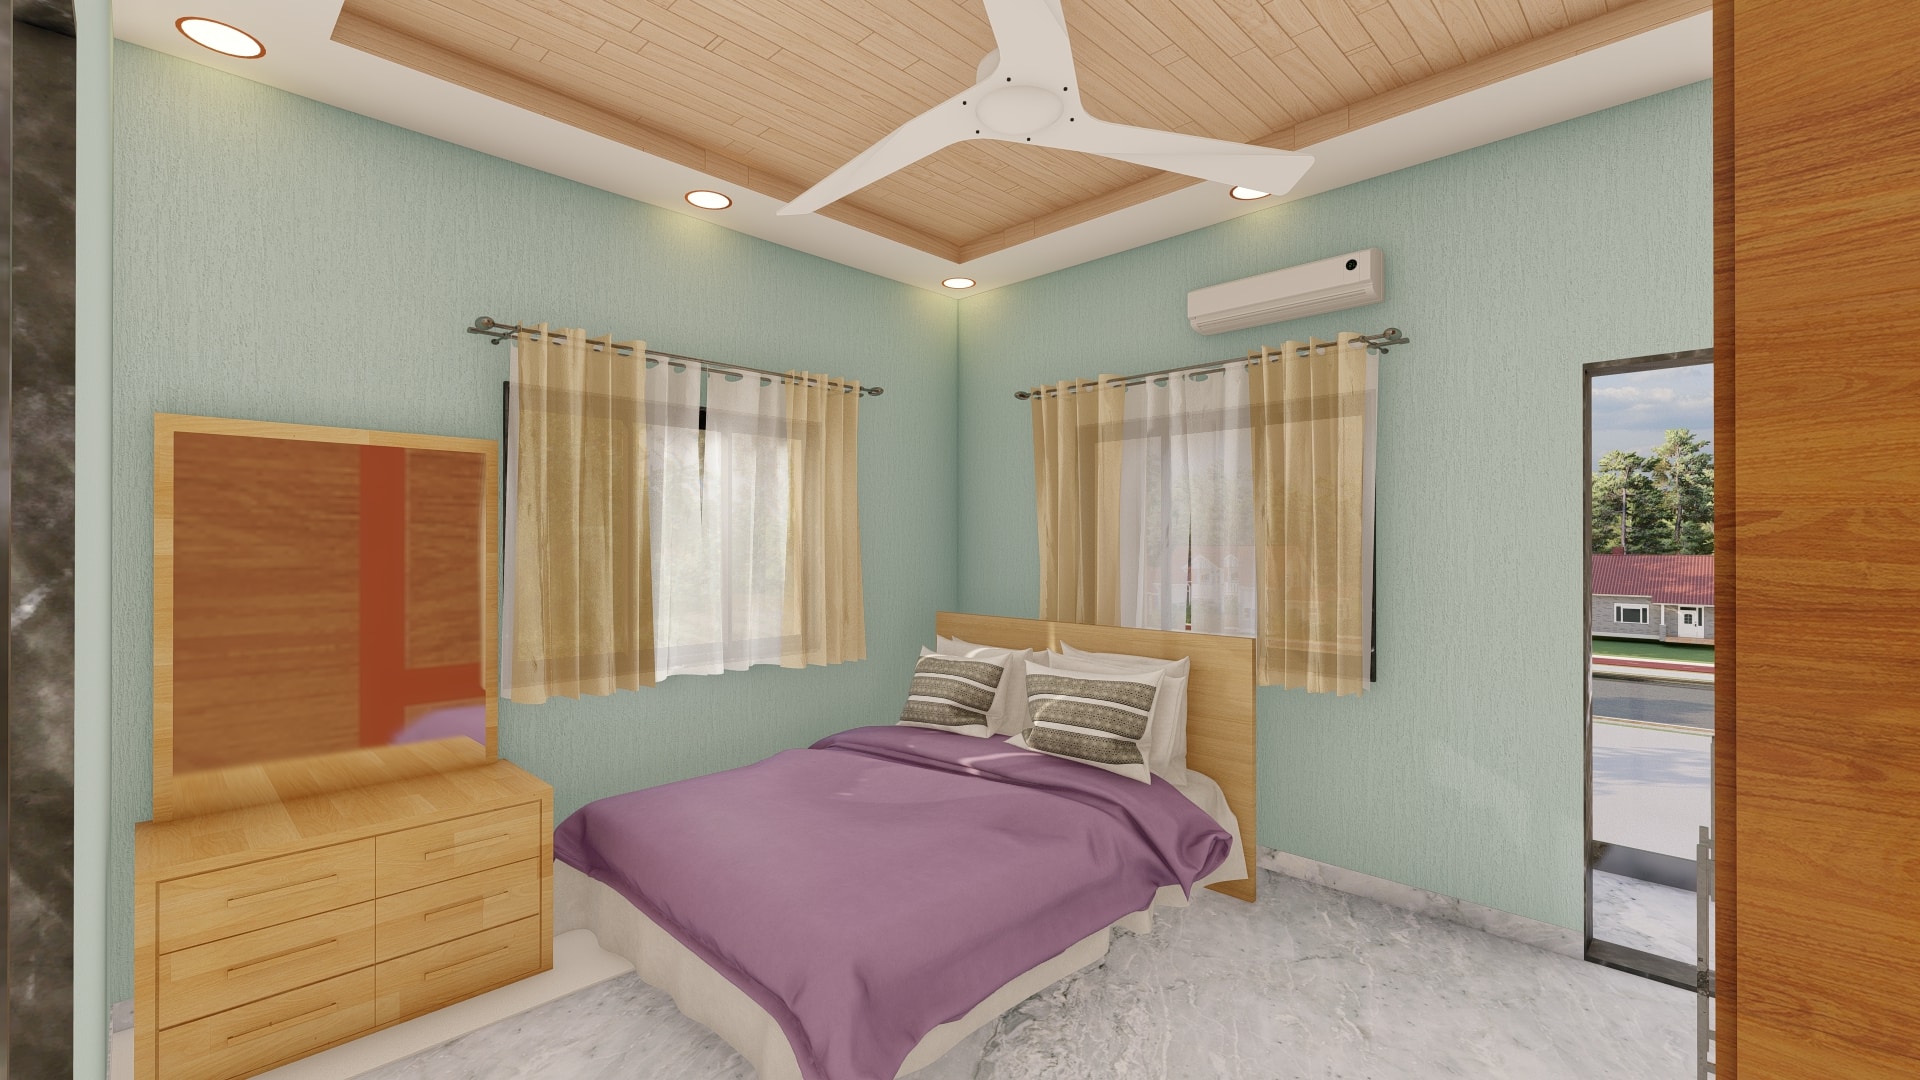 luxury bungalow home design bedroom by urban terrace east facing 1500 ft